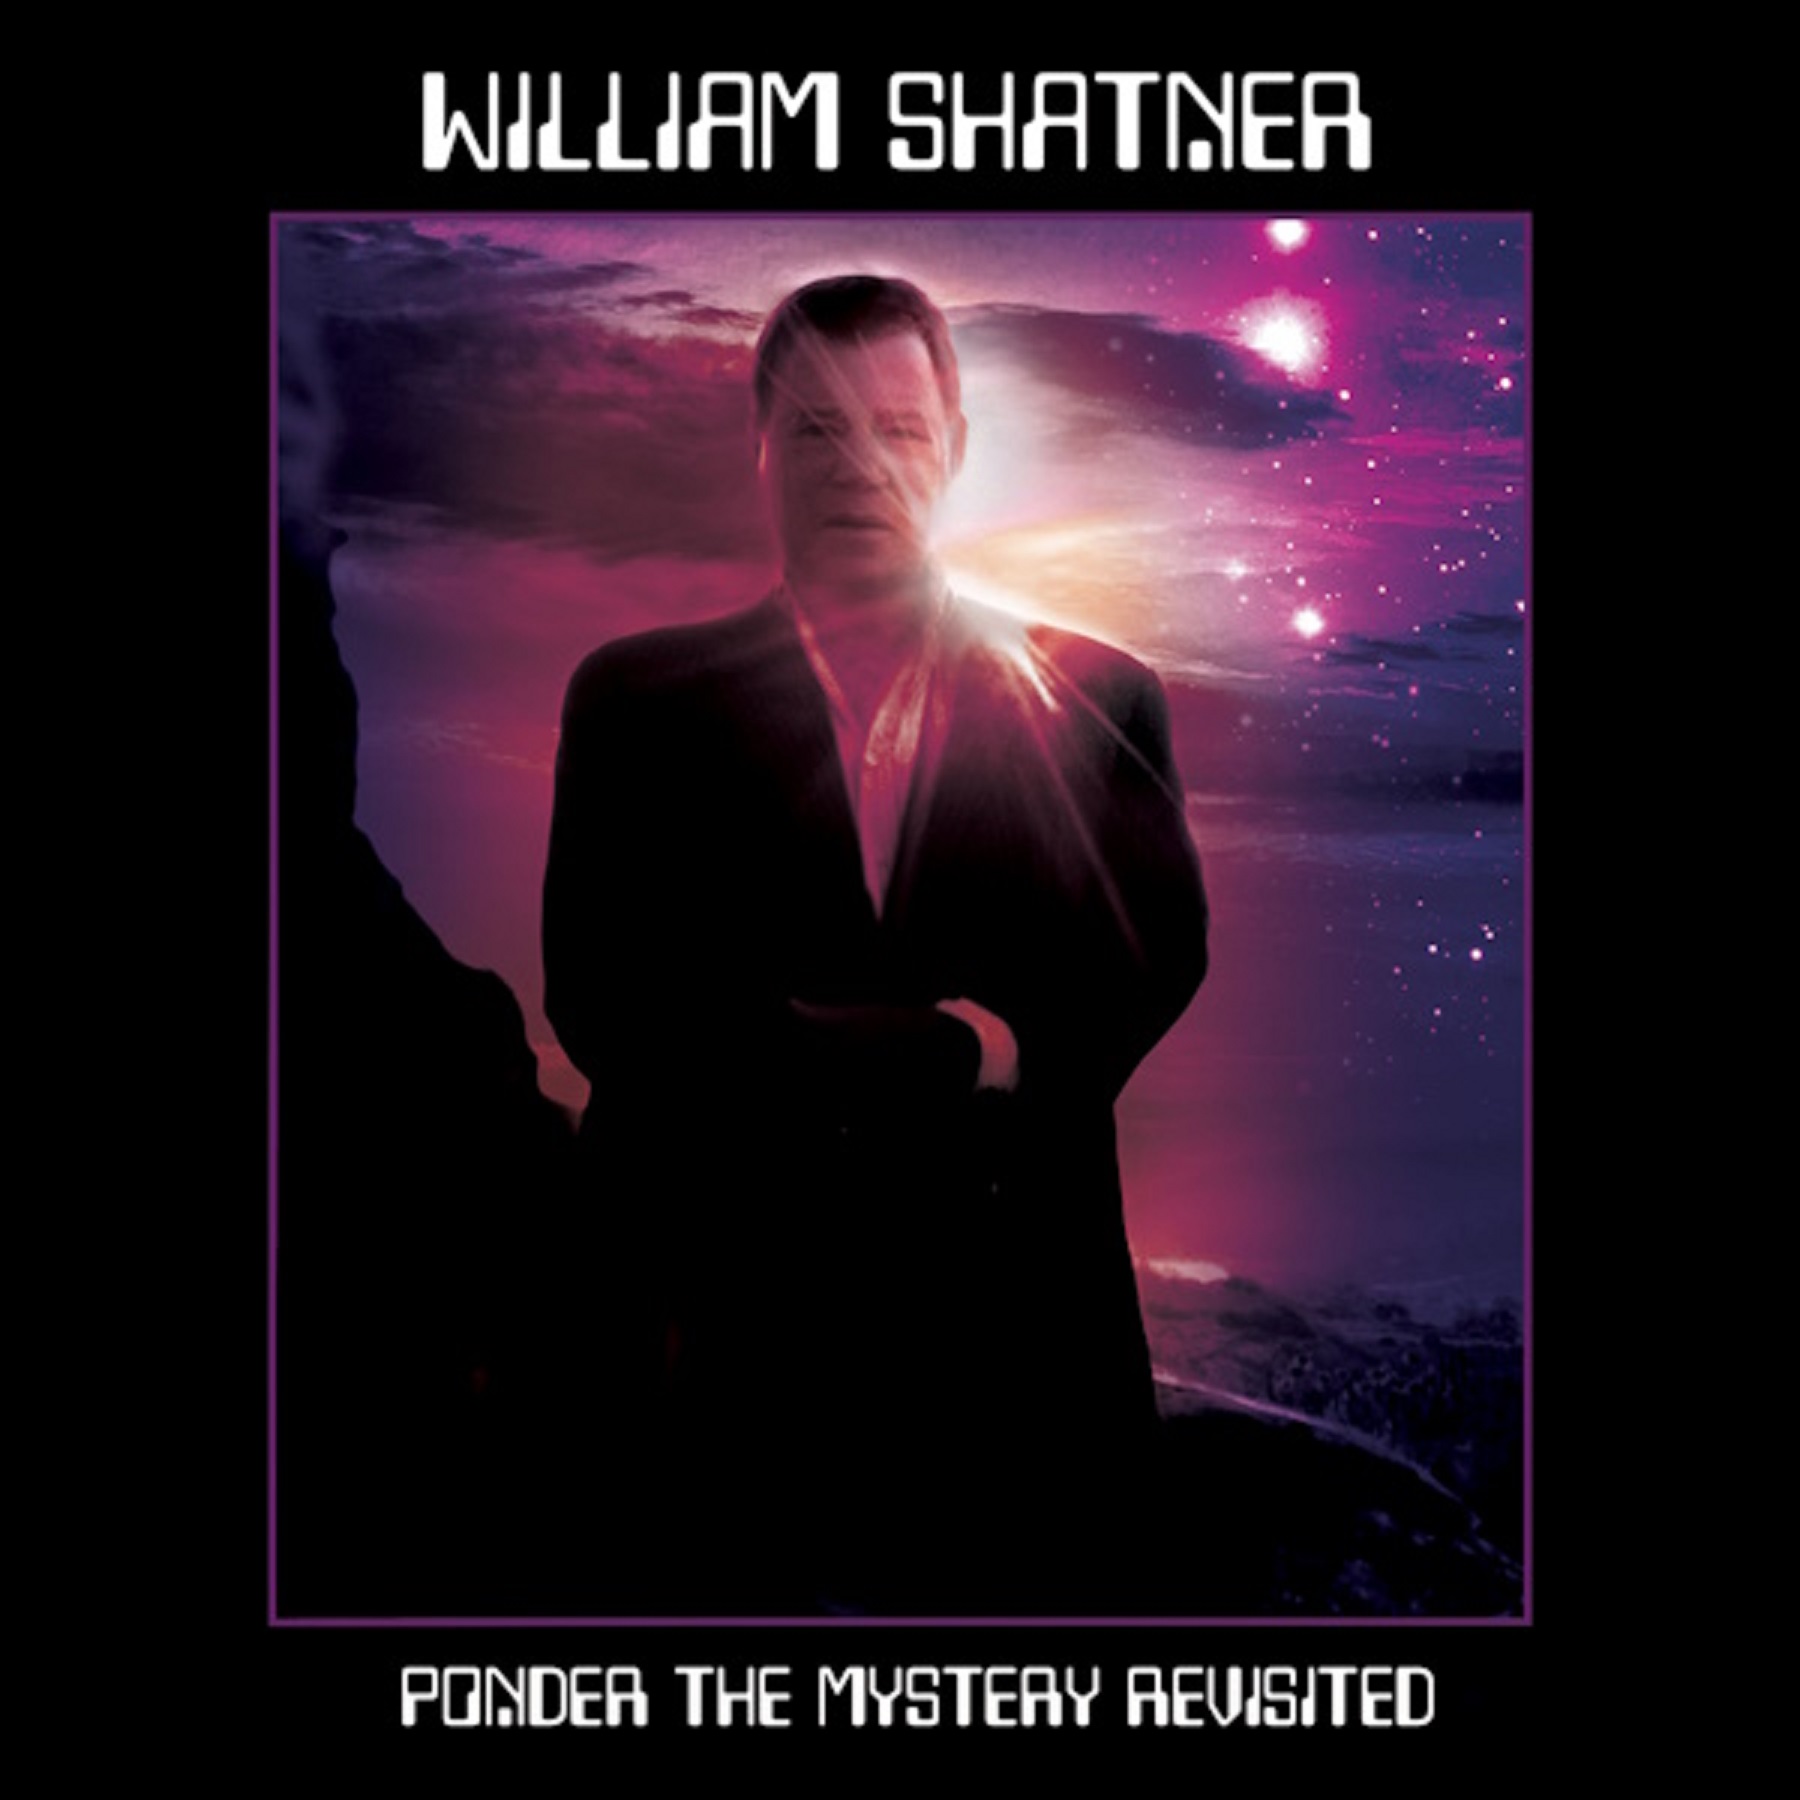 WILLIAM SHATNER’s “Most Creative” Project, A Star-Studded Prog Rock Album, Celebrates Its 10 Year Anniversary With An Entirely New Remix & Release!